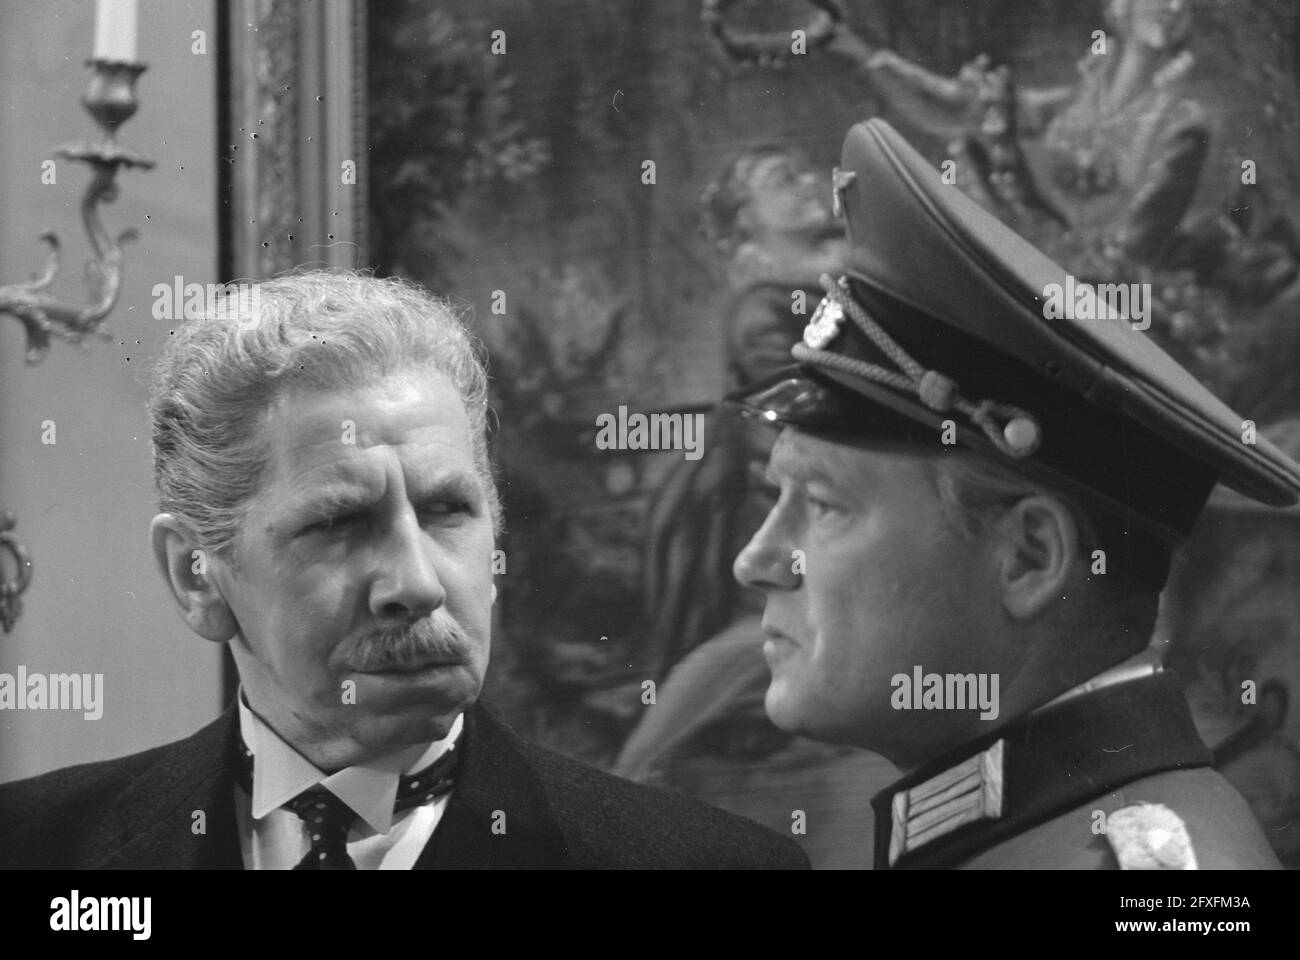 T. V. Game The Flycatcher. Max Croiset as Colonel Lanser and Joan Remmelts as Mayor Orden, May 4, 1961, actors, television dramas, The Netherlands, 20th century press agency photo, news to remember, documentary, historic photography 1945-1990, visual stories, human history of the Twentieth Century, capturing moments in time Stock Photo